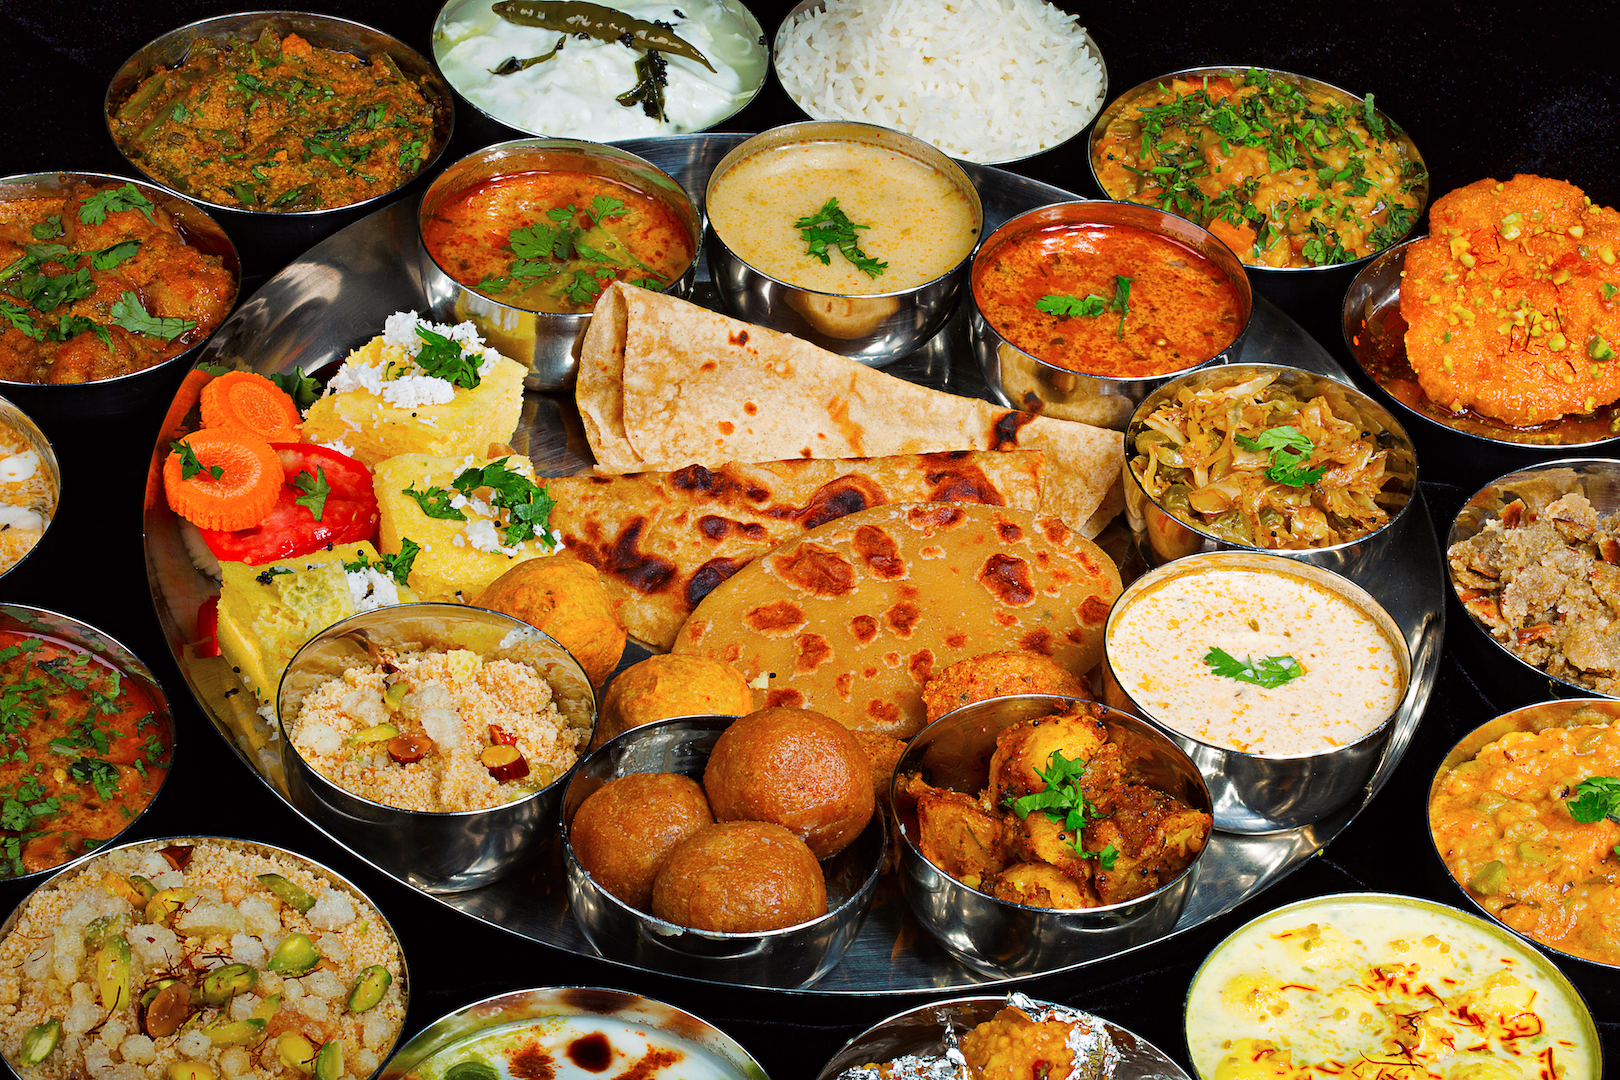 India secures 11th spot on 100 best cuisines in the world list